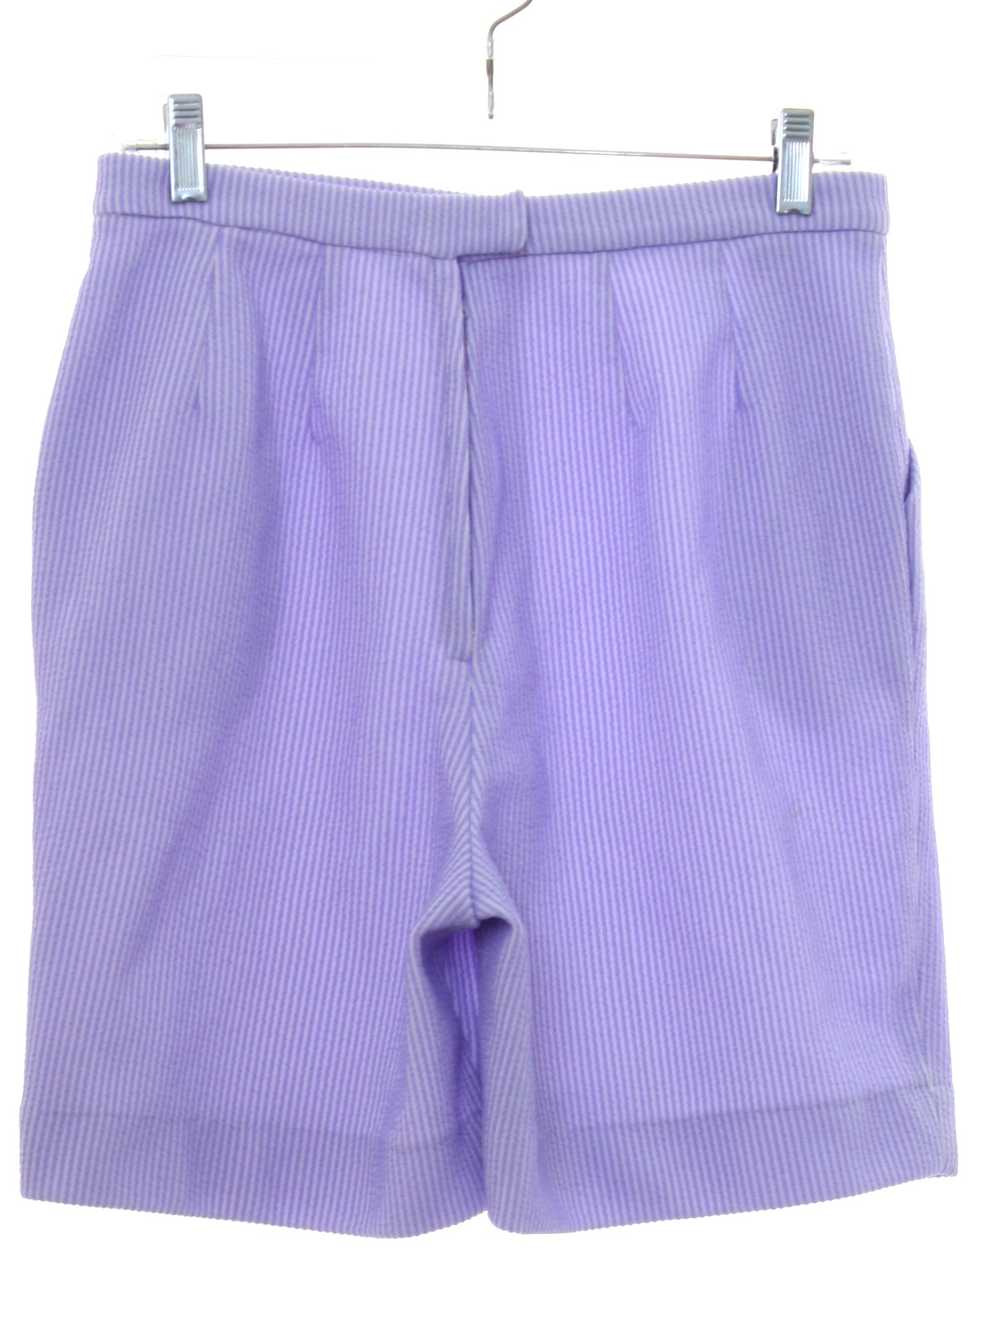 1970's Haymaker Womens Knit Shorts - image 3